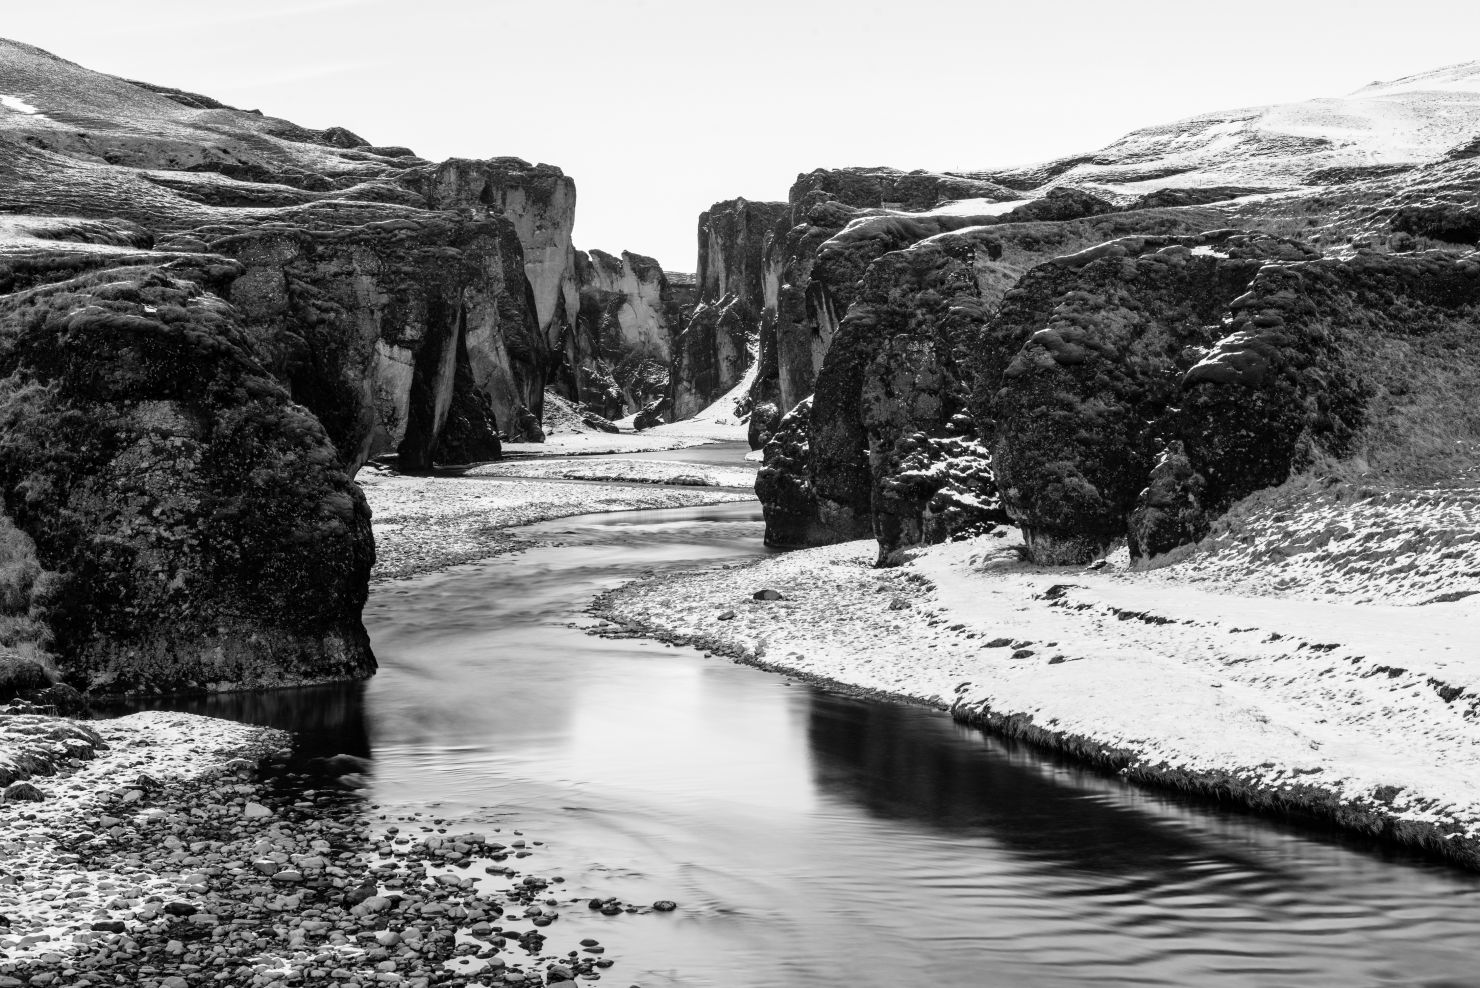 Gorge in Iceland